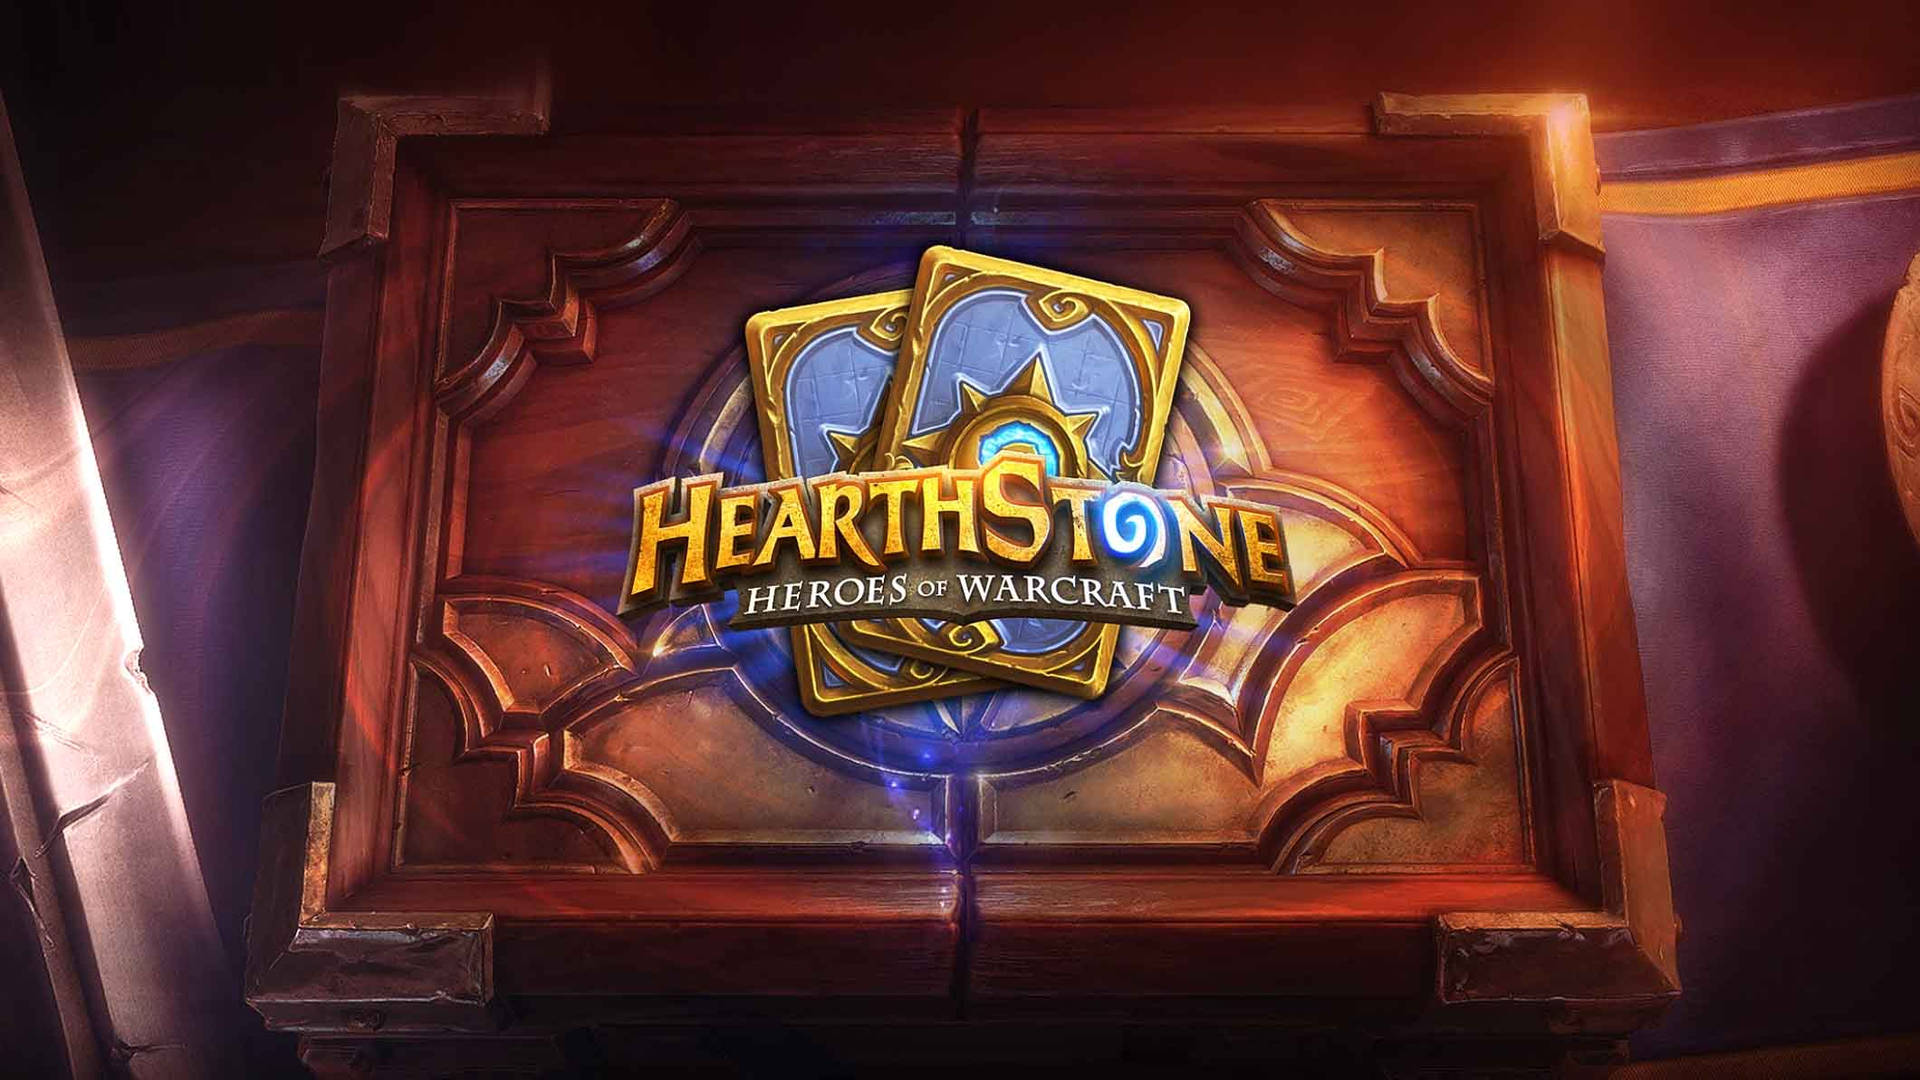 Legendary Hearthstone Card Game in Action Wallpaper